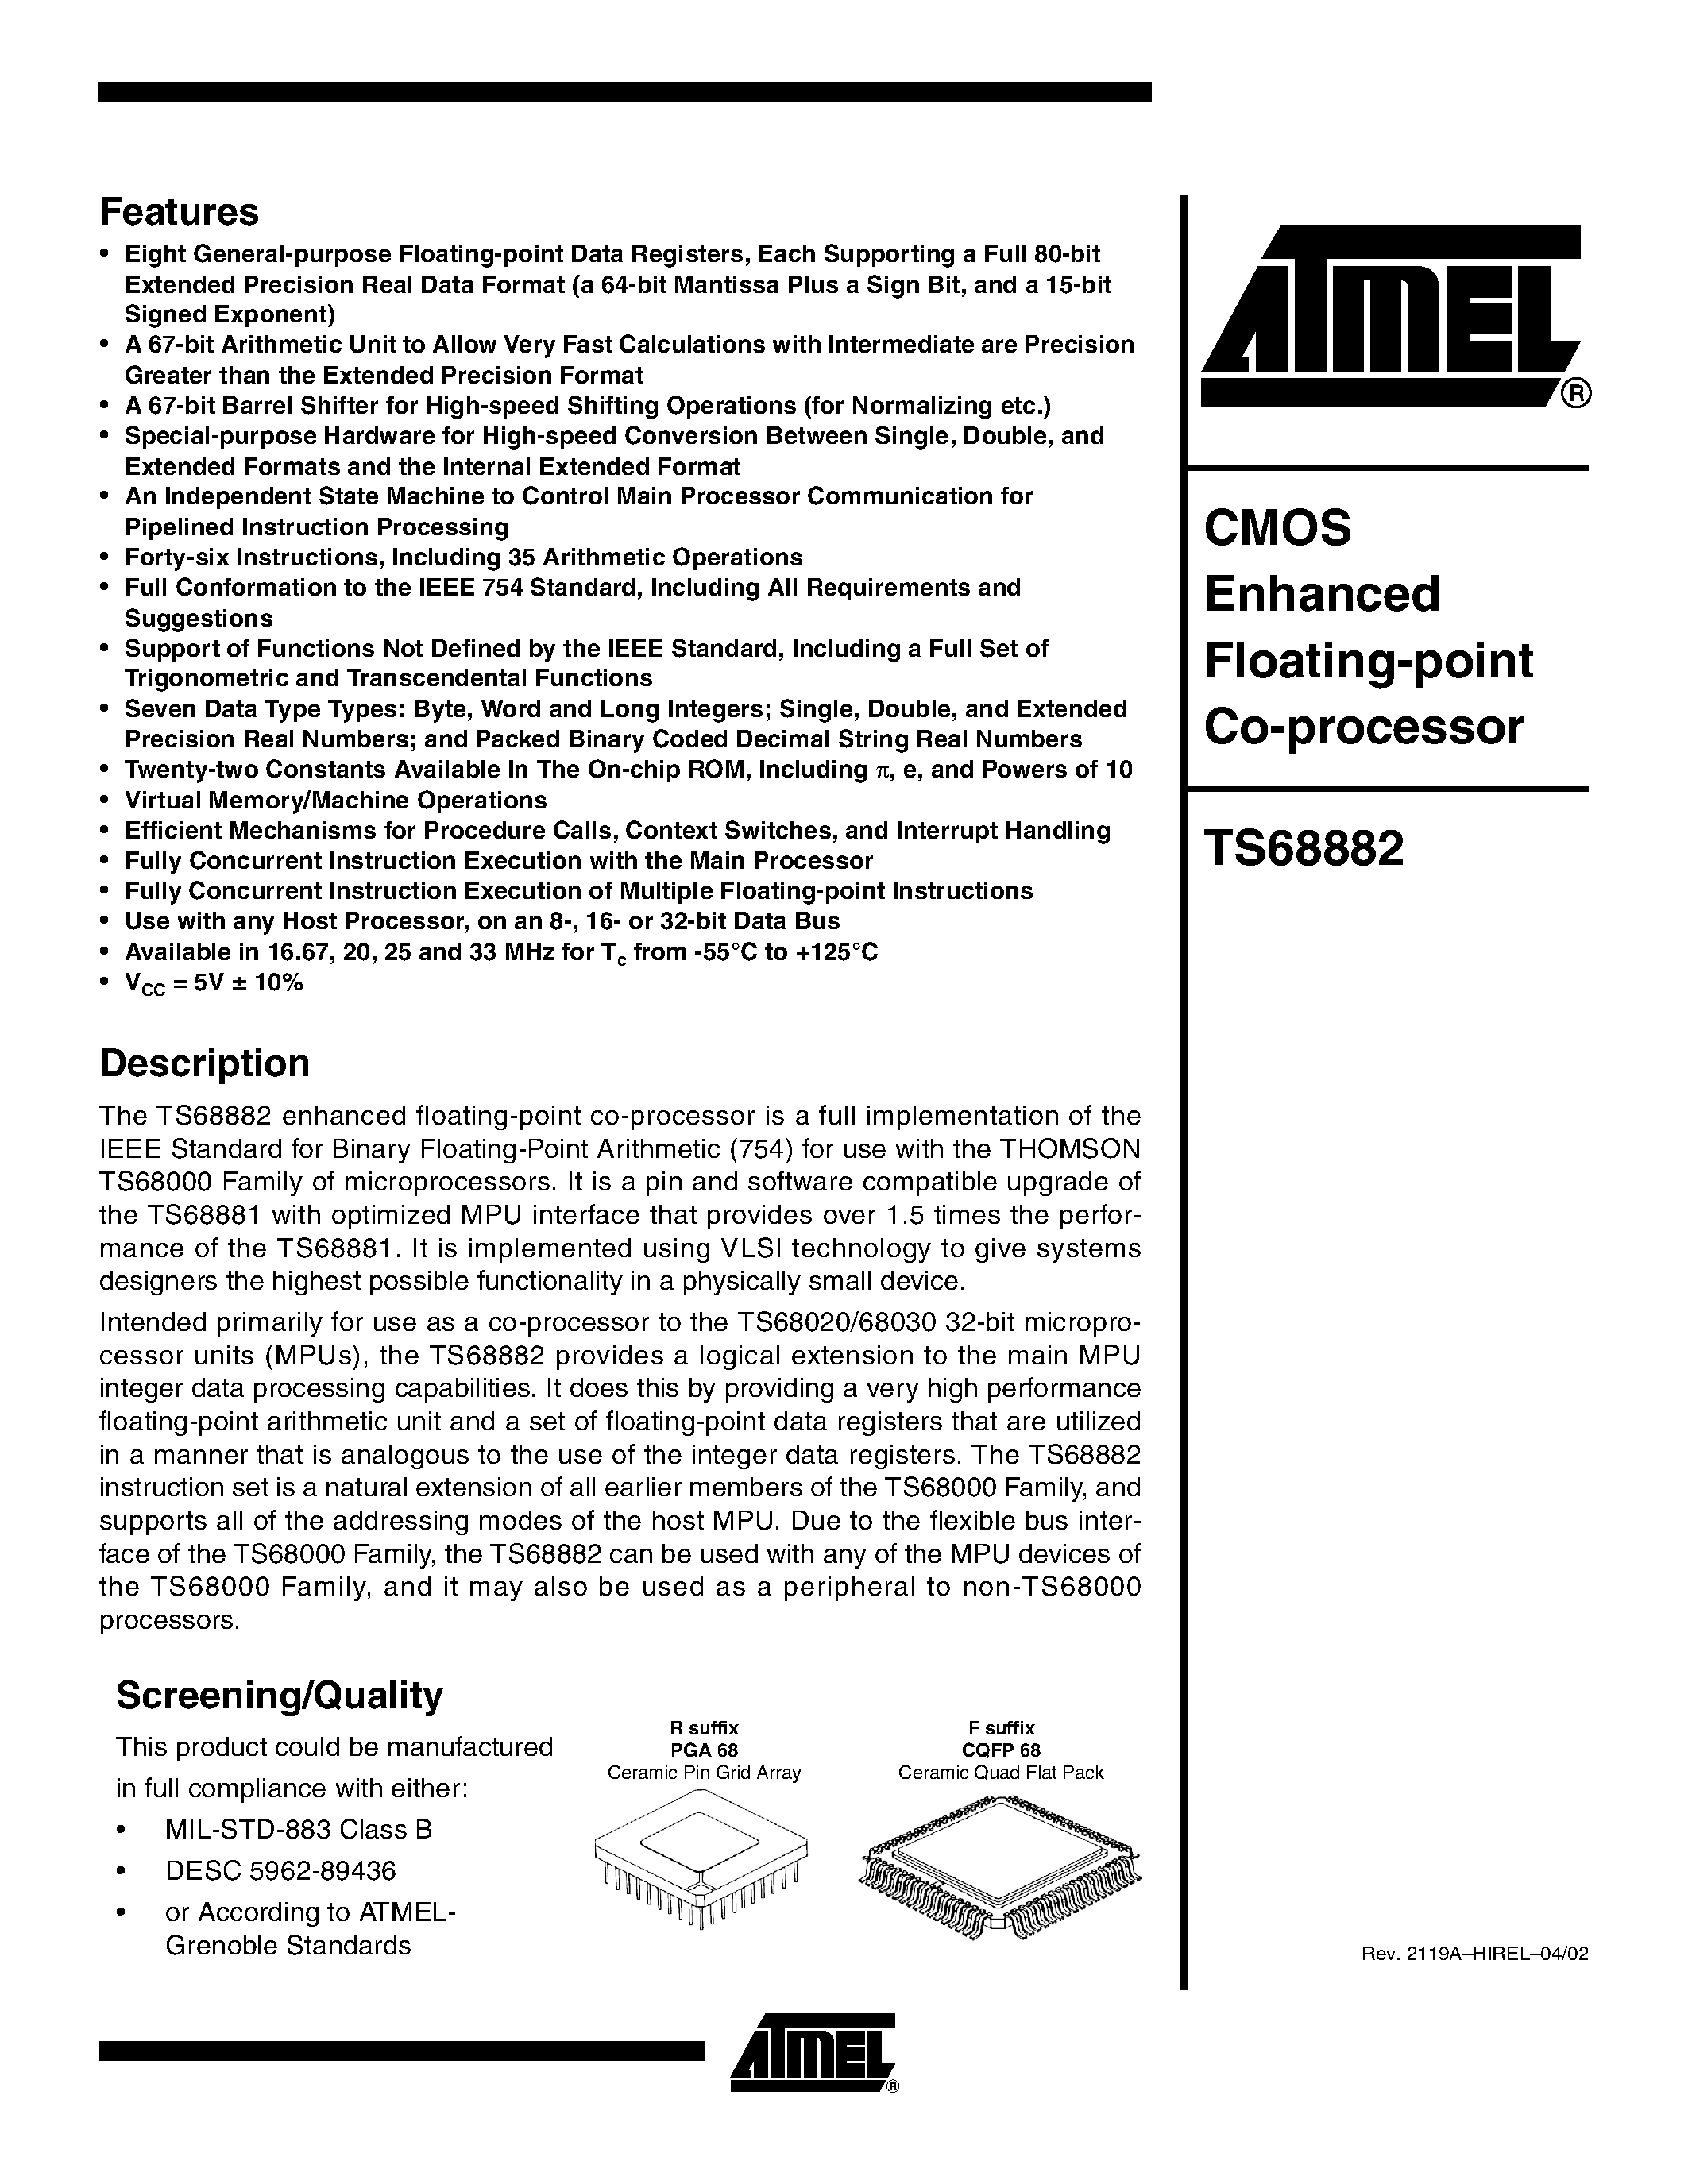 Datasheet TS68882VR25 - CMOS Enhanced Floating-point Co-processor page 1